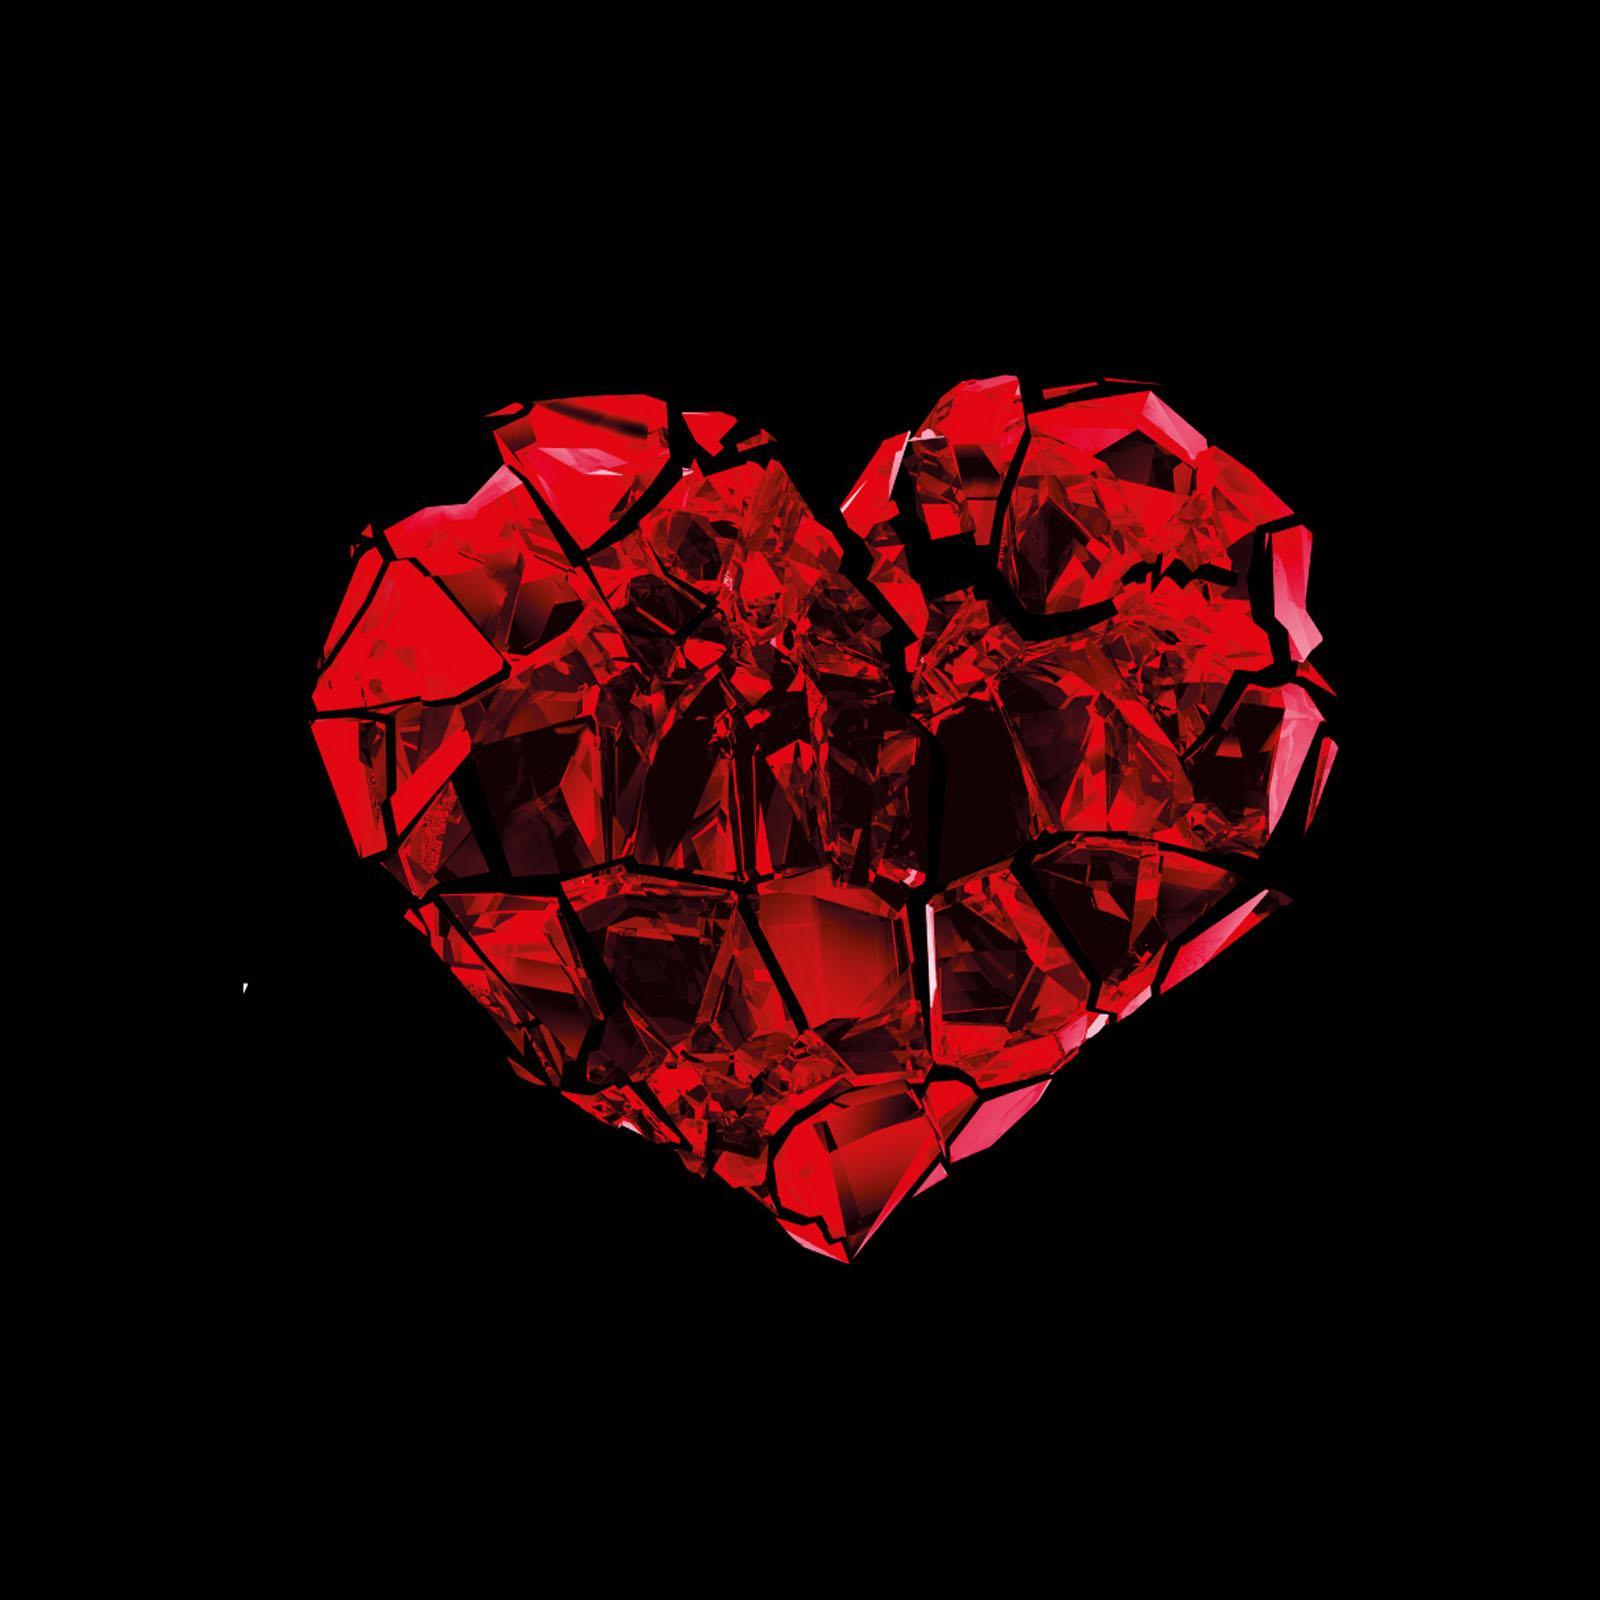 A crystallised red heart against a black background 